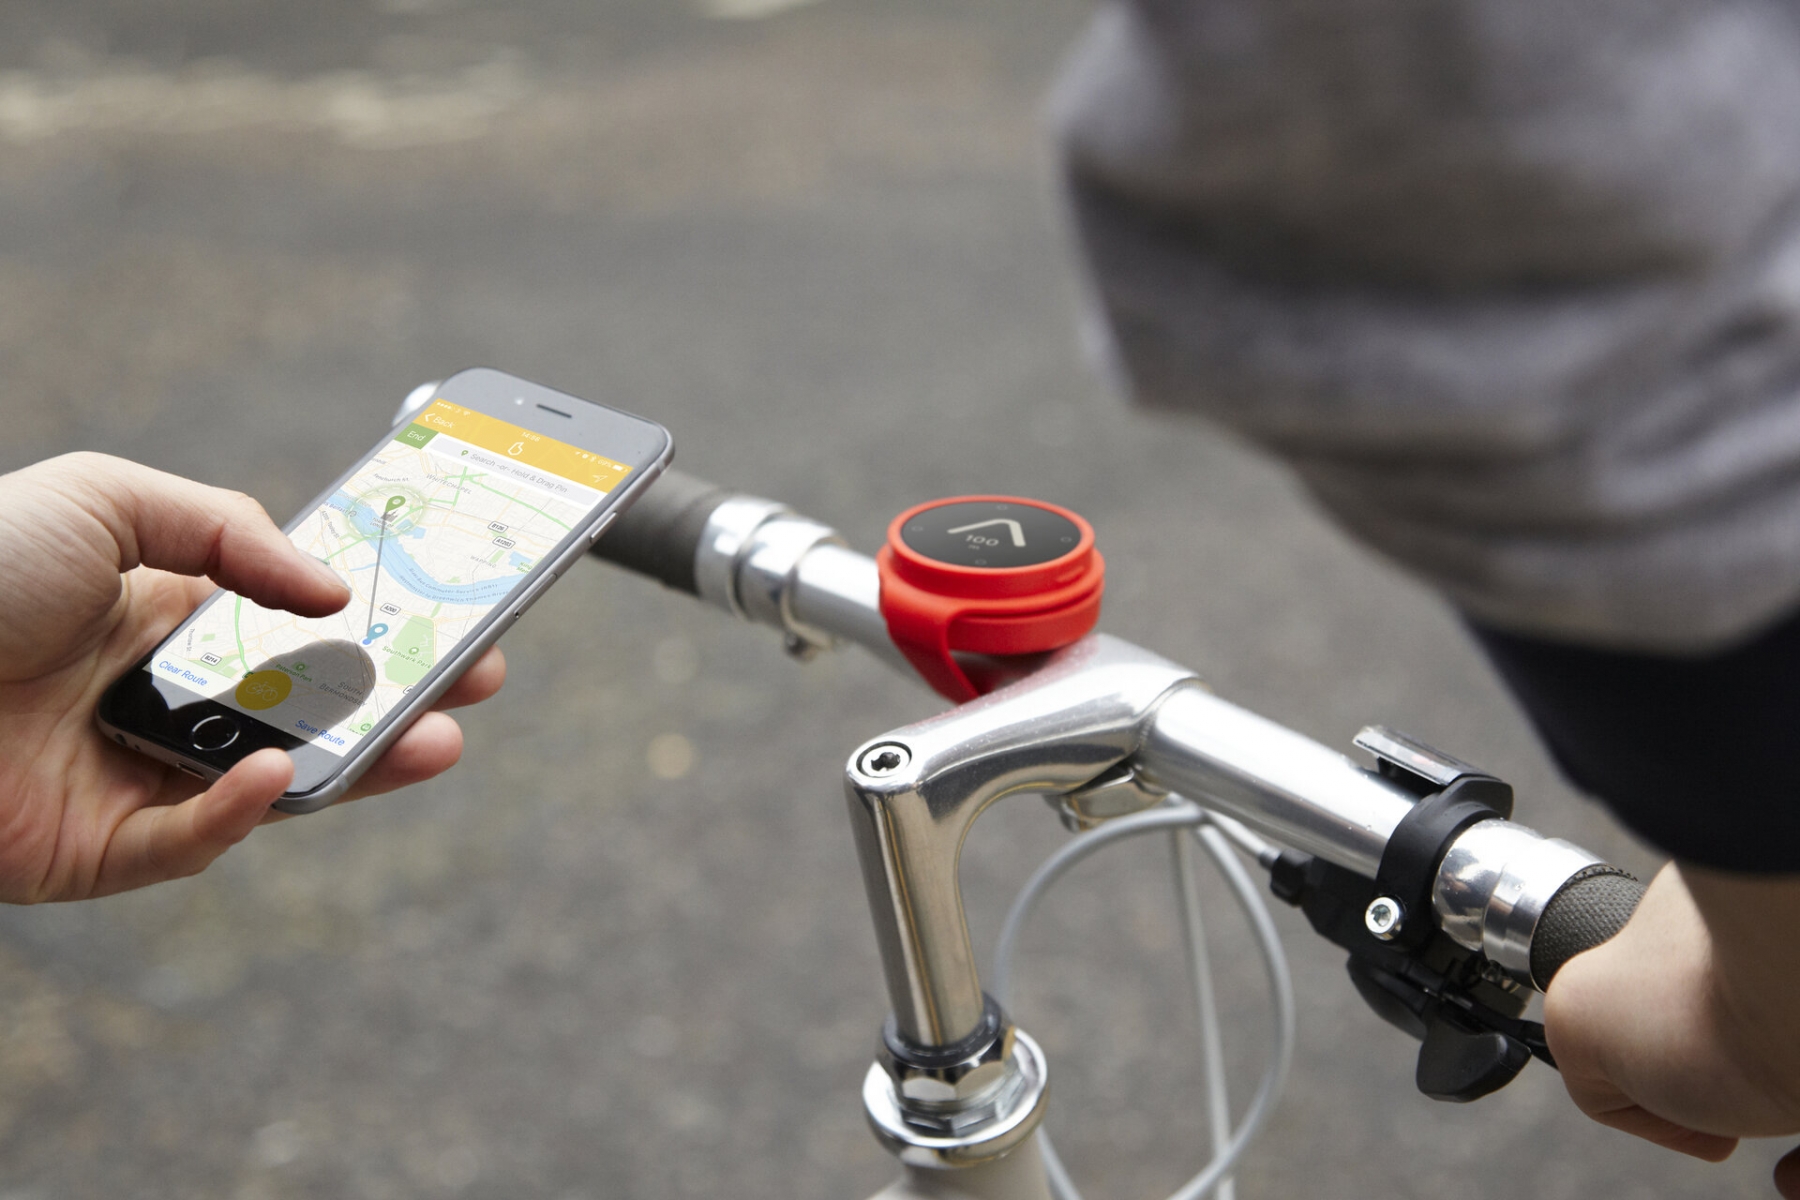 The app calculates the best route and gives navigation directions for cyclists